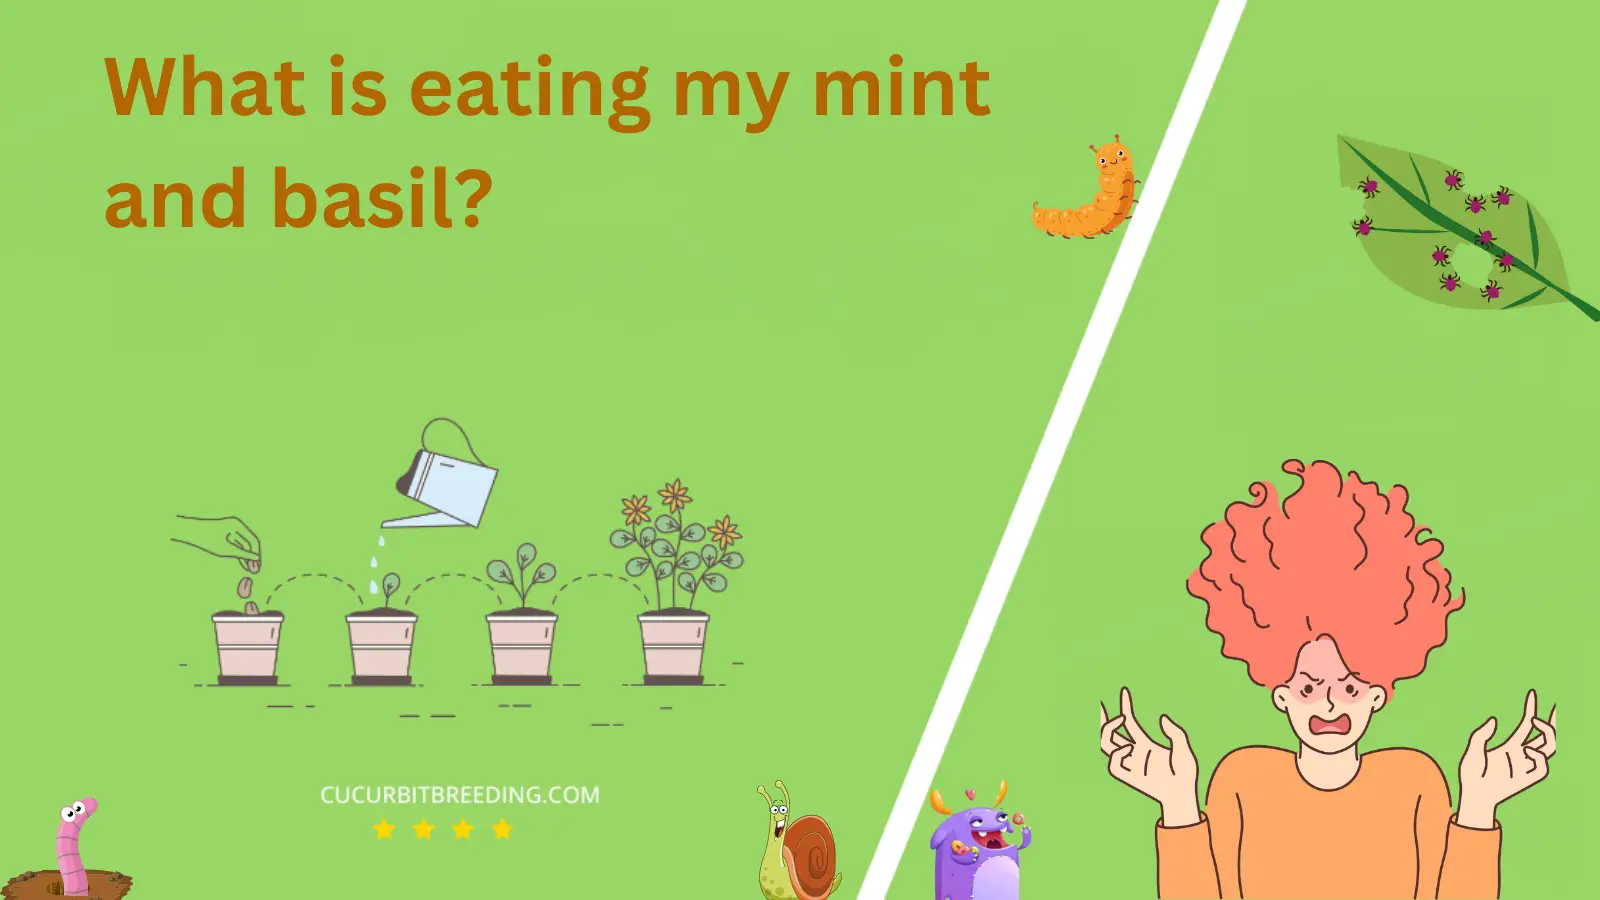 What is eating my mint and basil